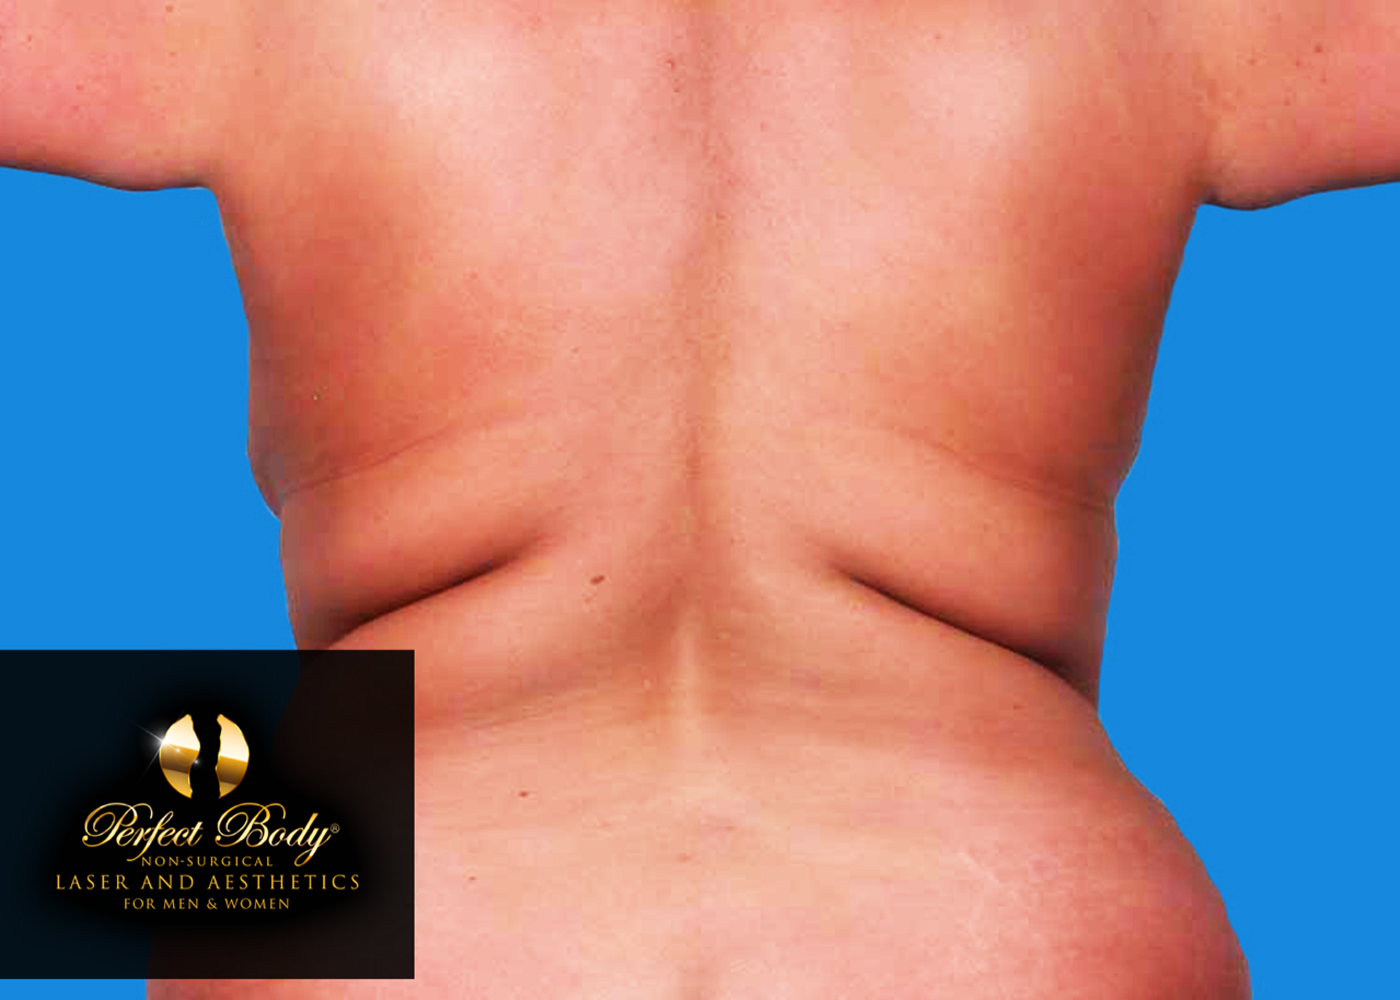 CoolSculpting laser fat removal for a Perfect Body!